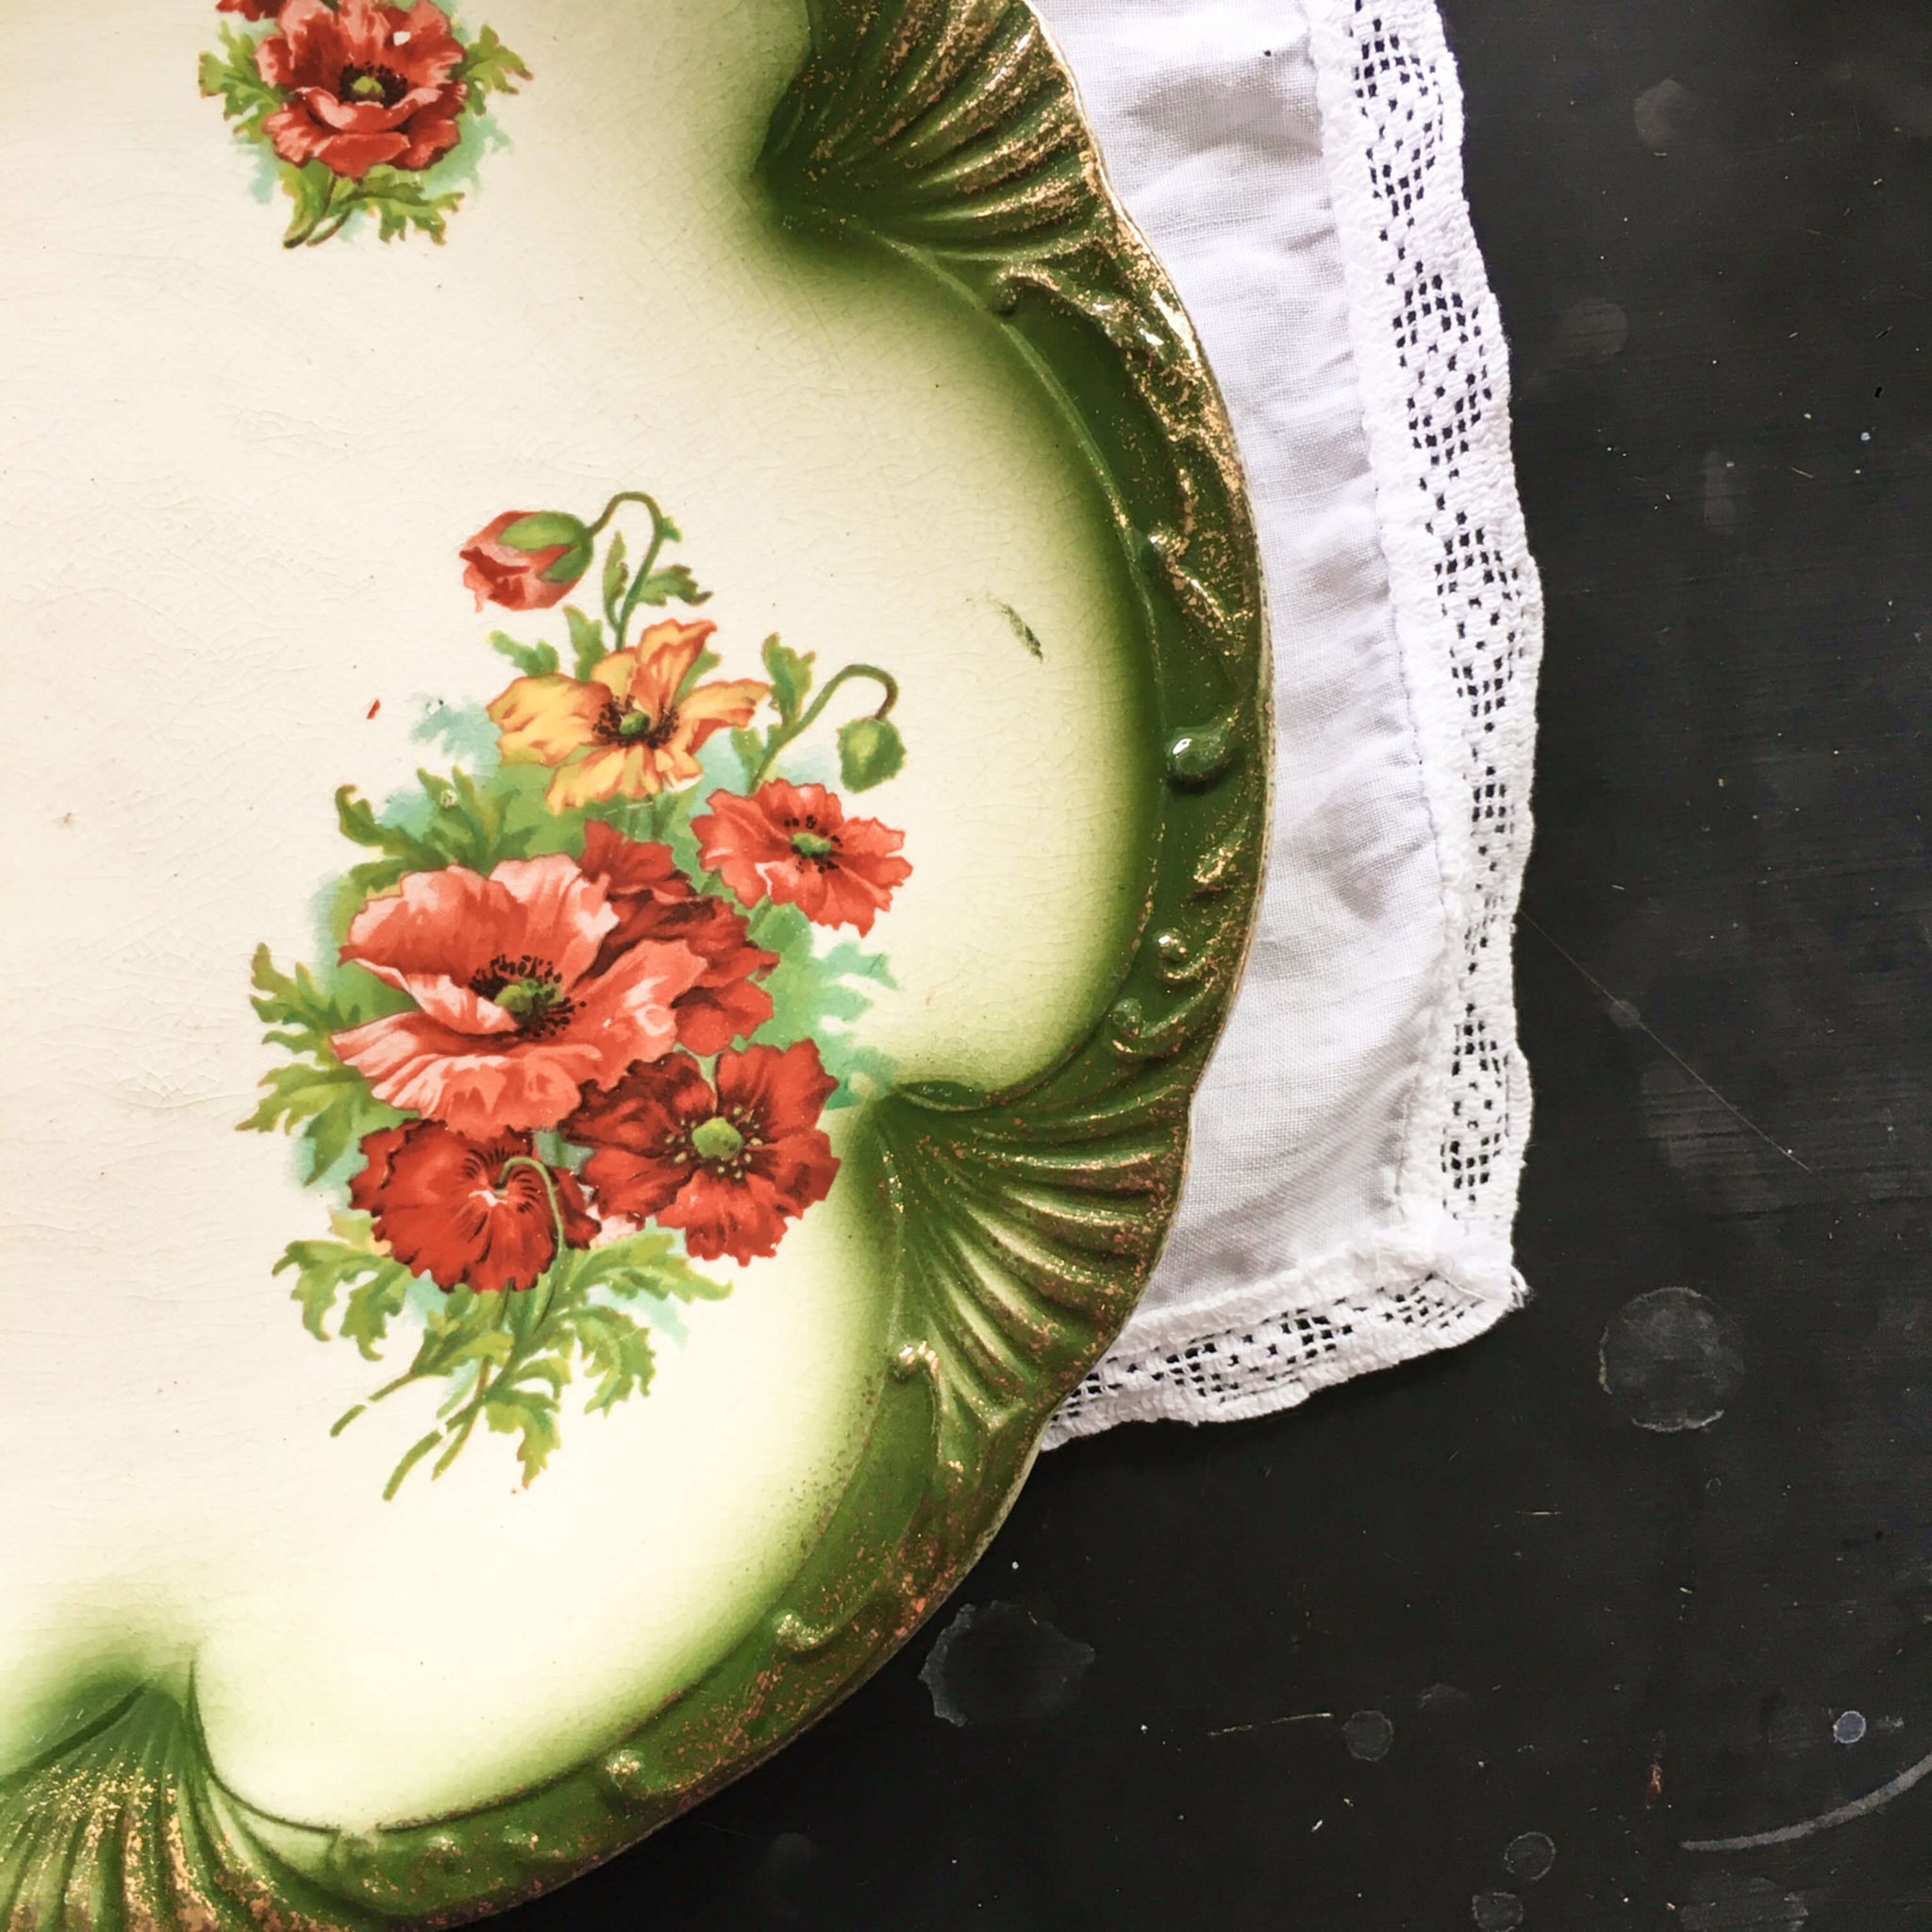 Antique Red Poppy Floral Plate with Green Scalloped Edge and Gold Spray